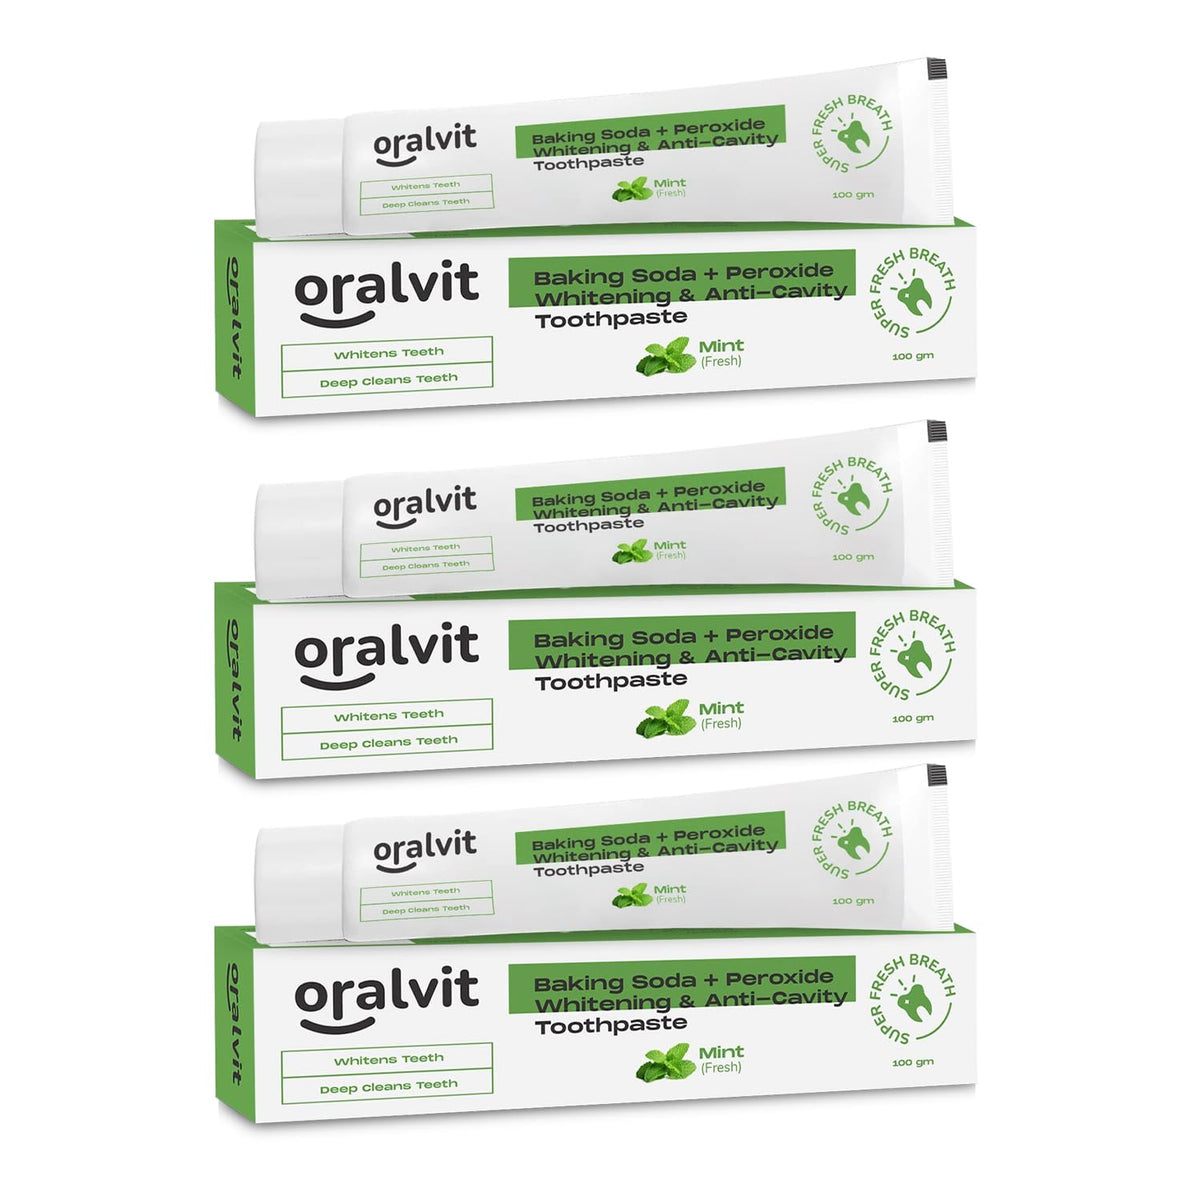 Oralvit Baking Soda and Peroxide Toothpaste for Whitening & Anti-Cavity | Toothpaste with Fresh Mint | Deep Cleanse |Super Fresh Breath | Extreme Whitening– 100gm Mint Flavour (Pack of 3)